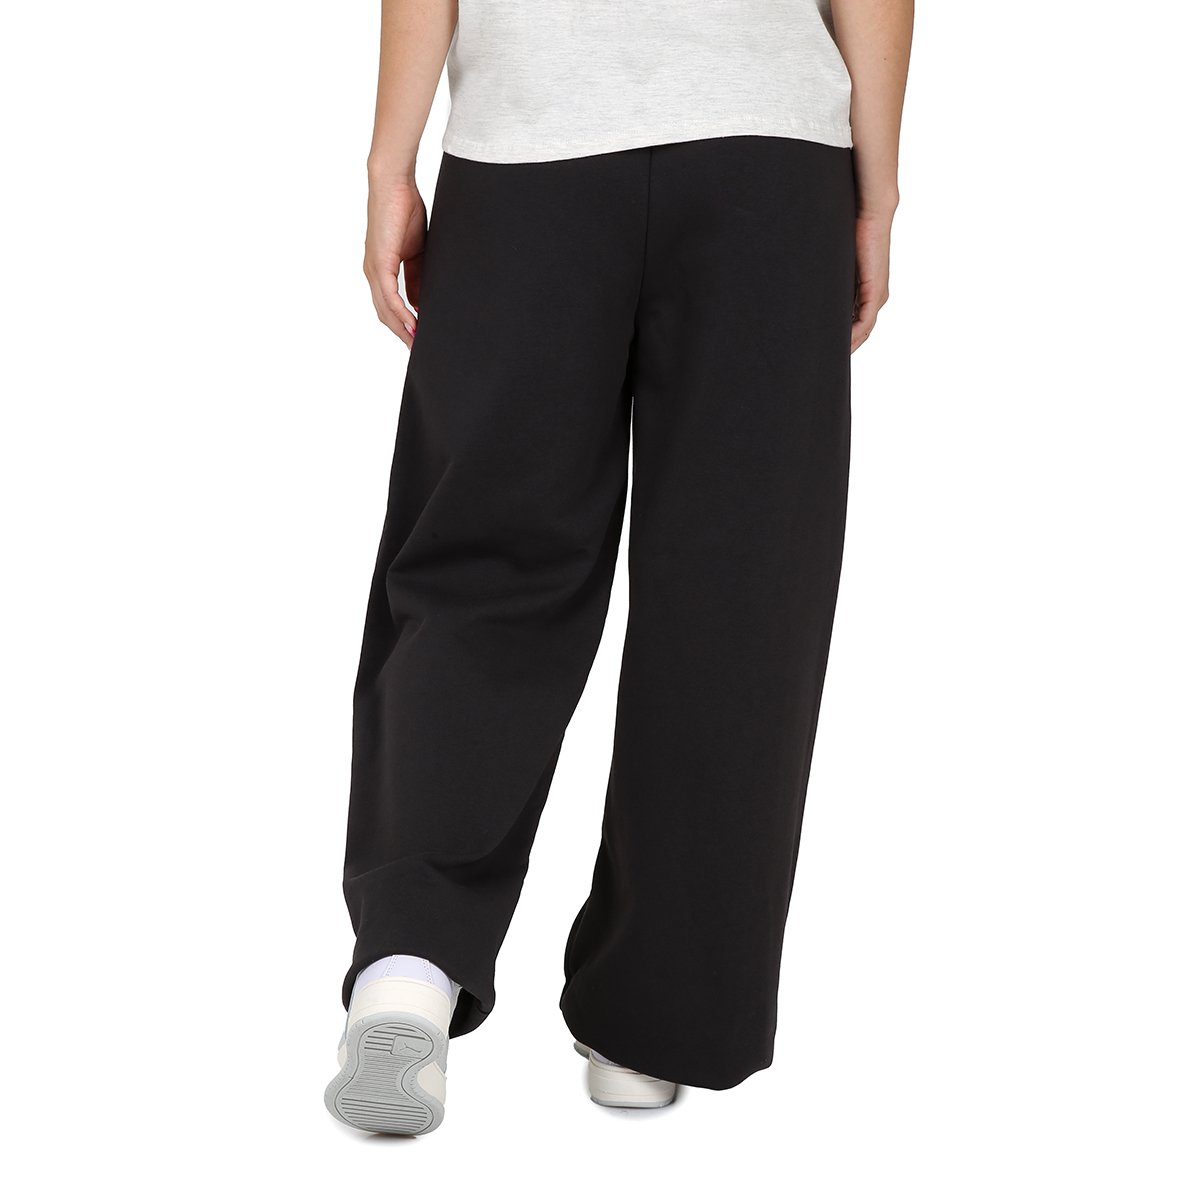 Pantalón Puma Classics Relaxed Cre Mujer,  image number null